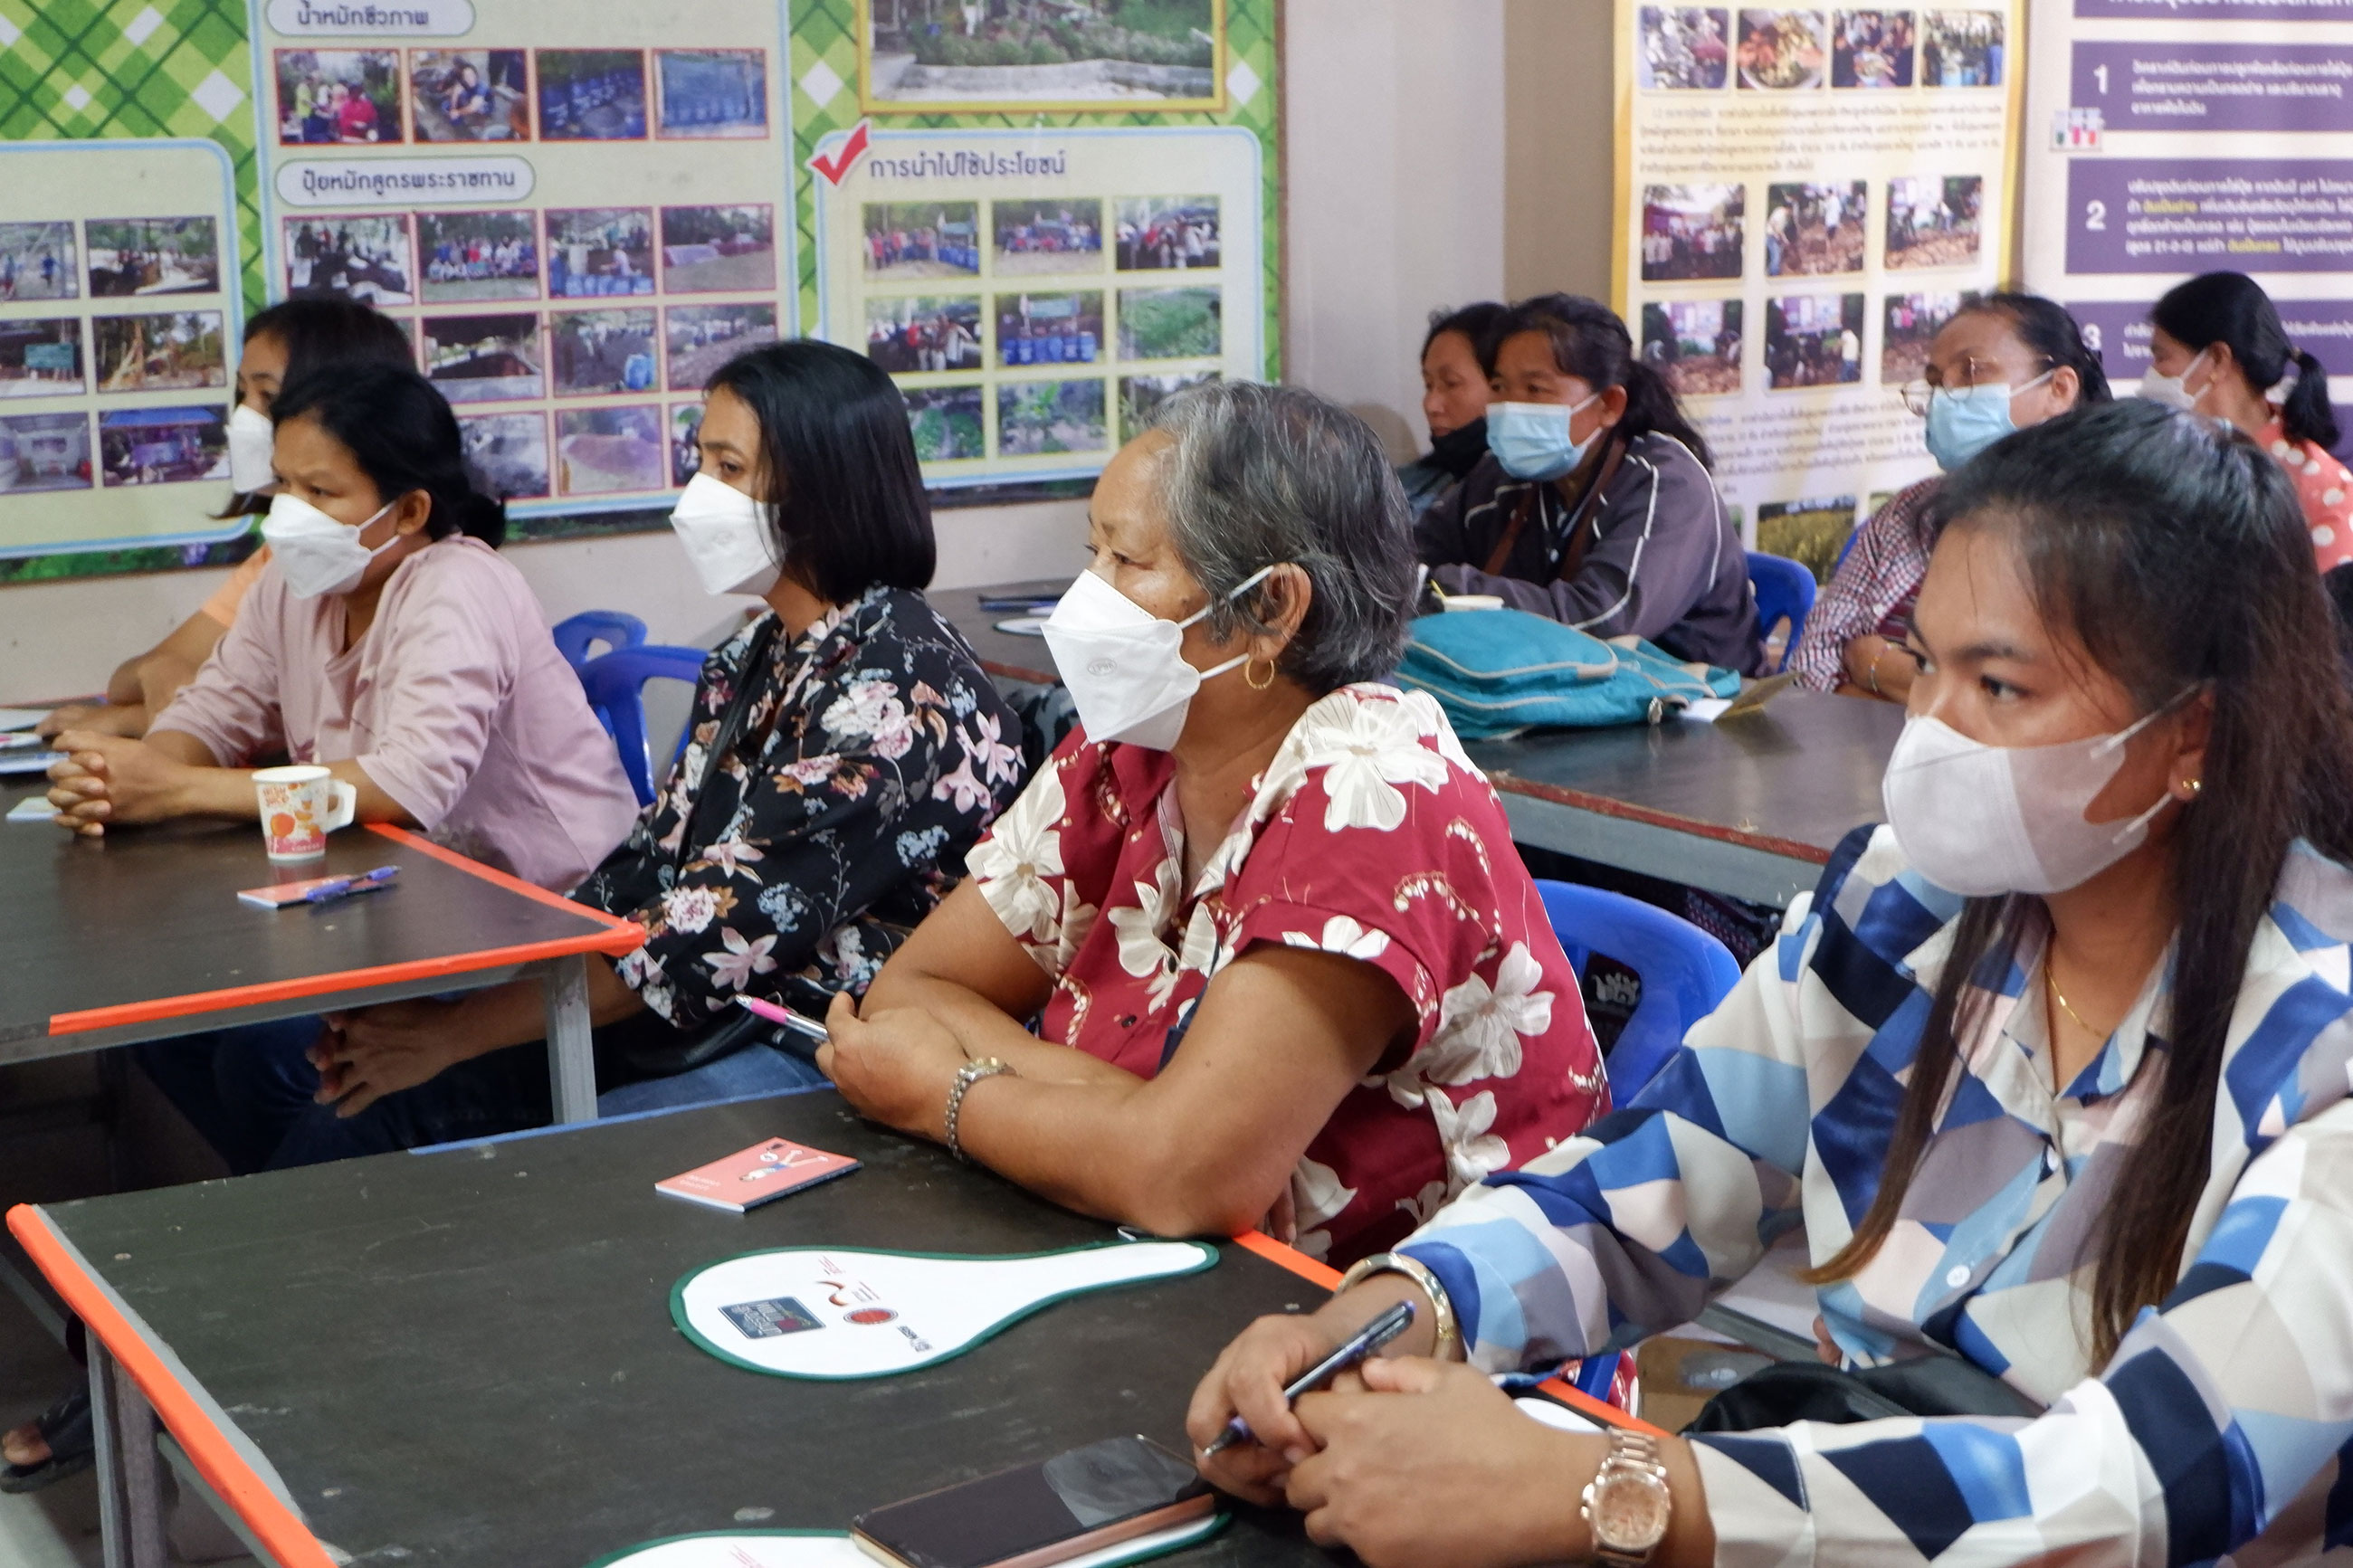 17 farmers from Huai Nai Roi Community Coffee Farmer Group made a study trip to and participated in an introduction session provided by the Community Fertilizer Soil Management Center in Moo 3, Joporor Sub-district, Kraburi District, Ranong Province.